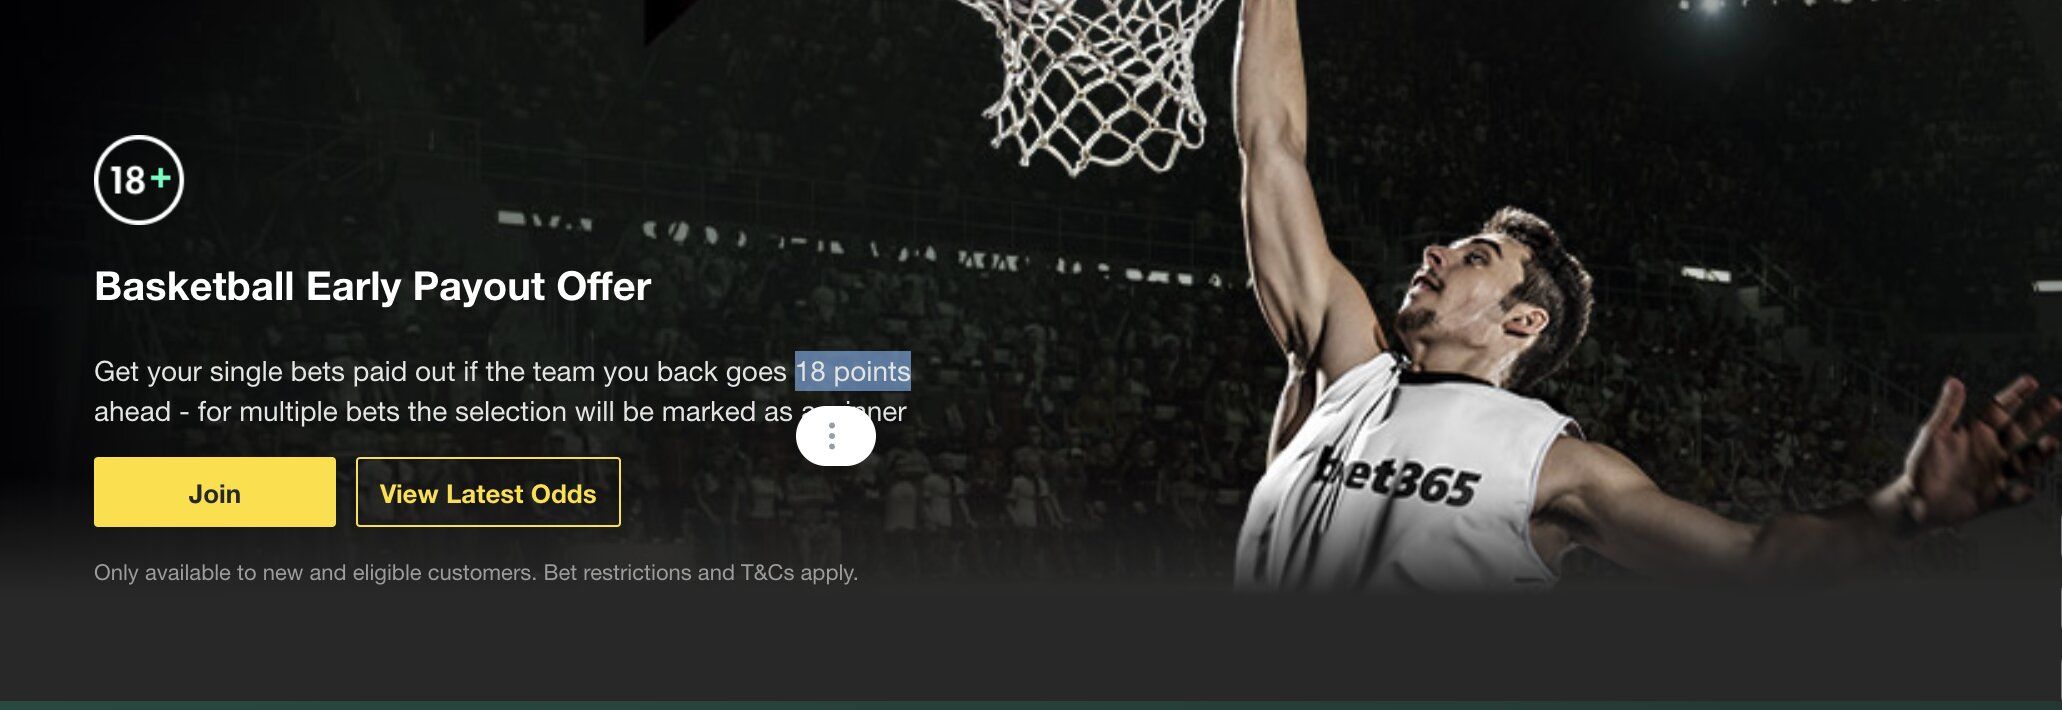 Bet365 Basketball Early Payout Offer